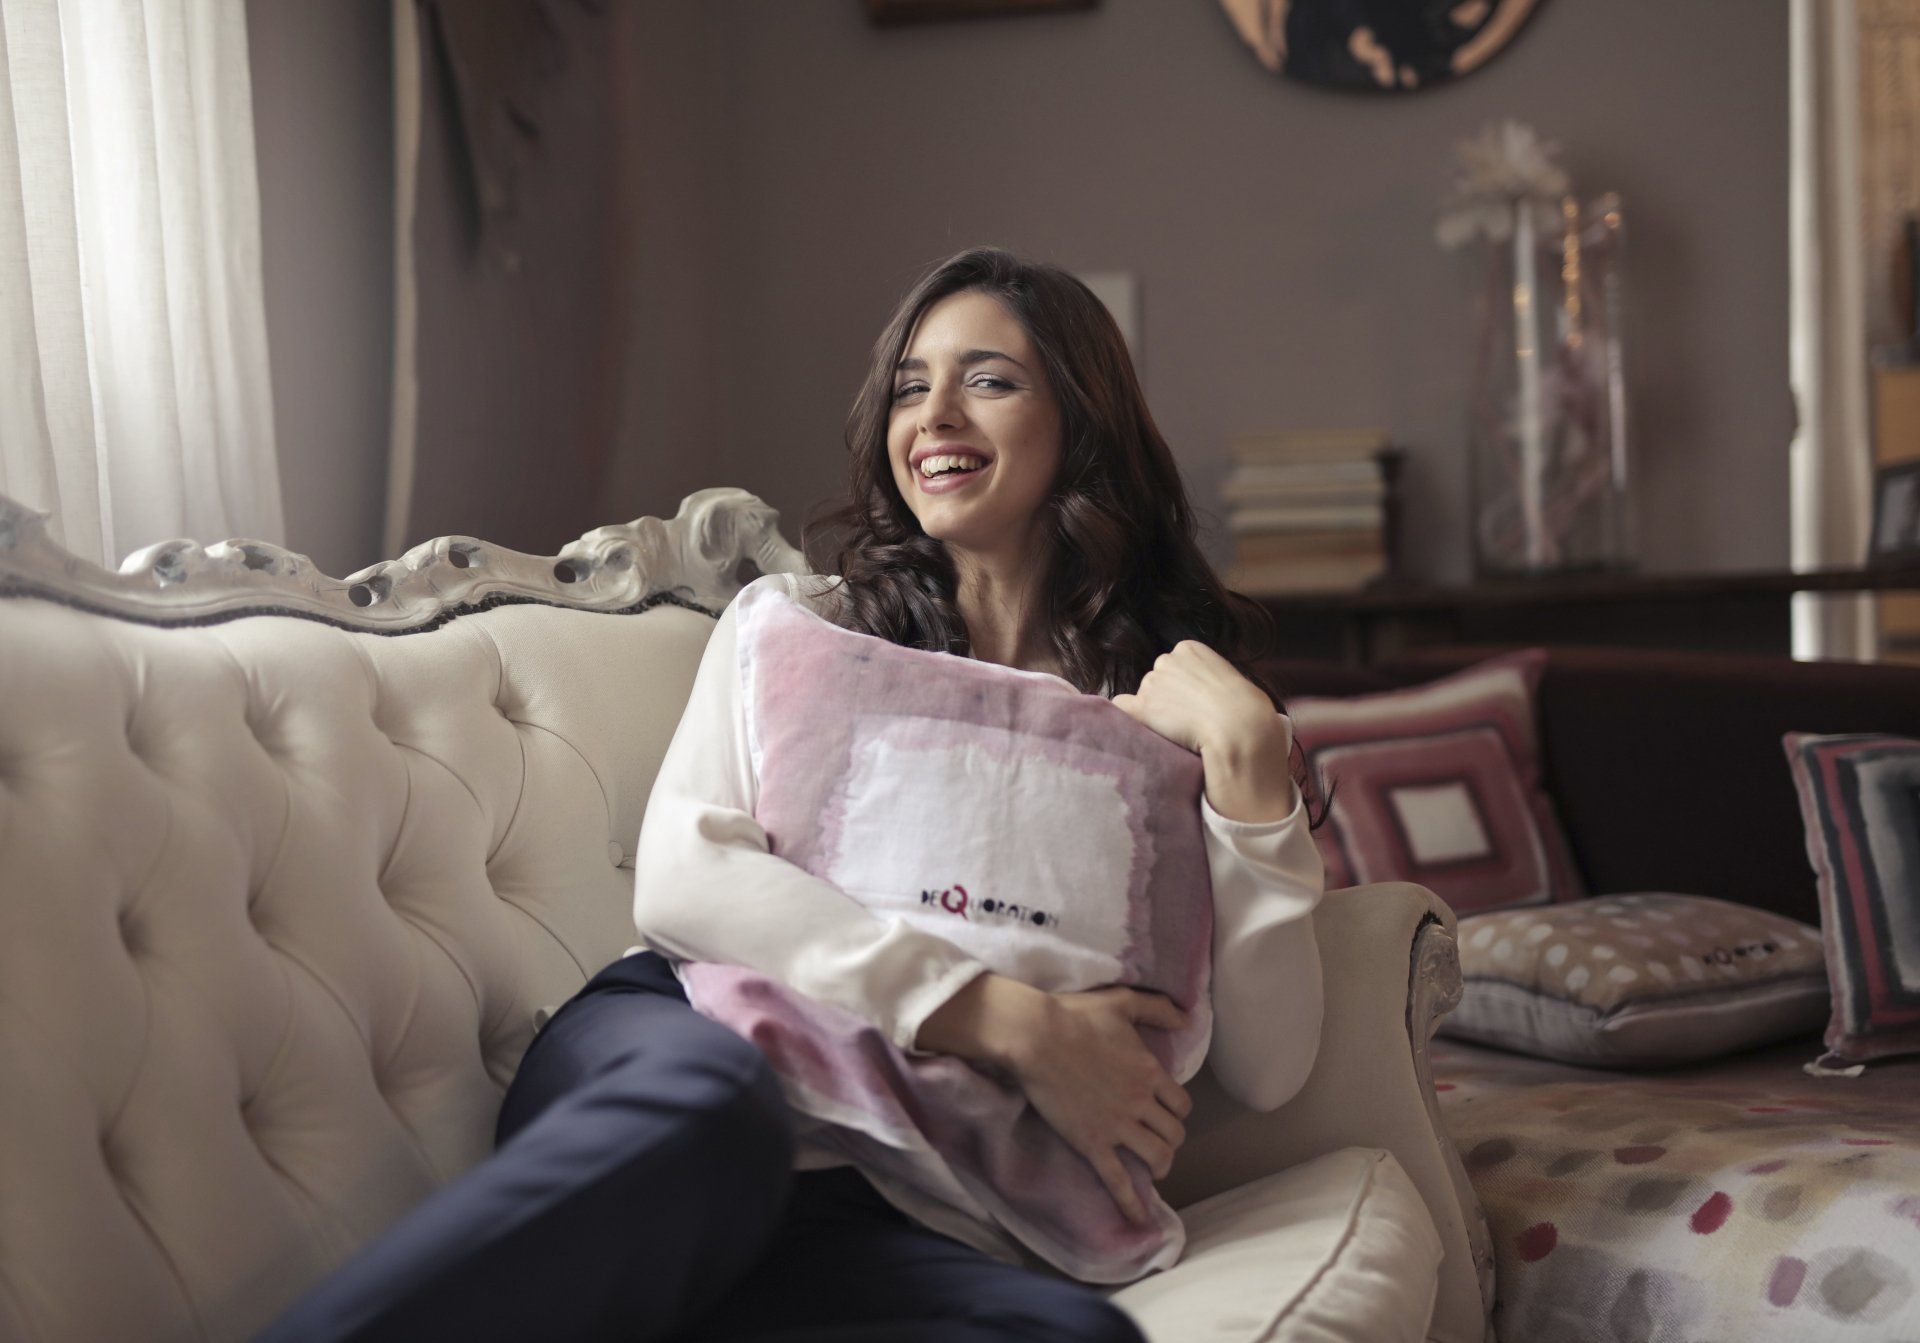 A woman is sitting on a couch holding two pillows in her clean home.